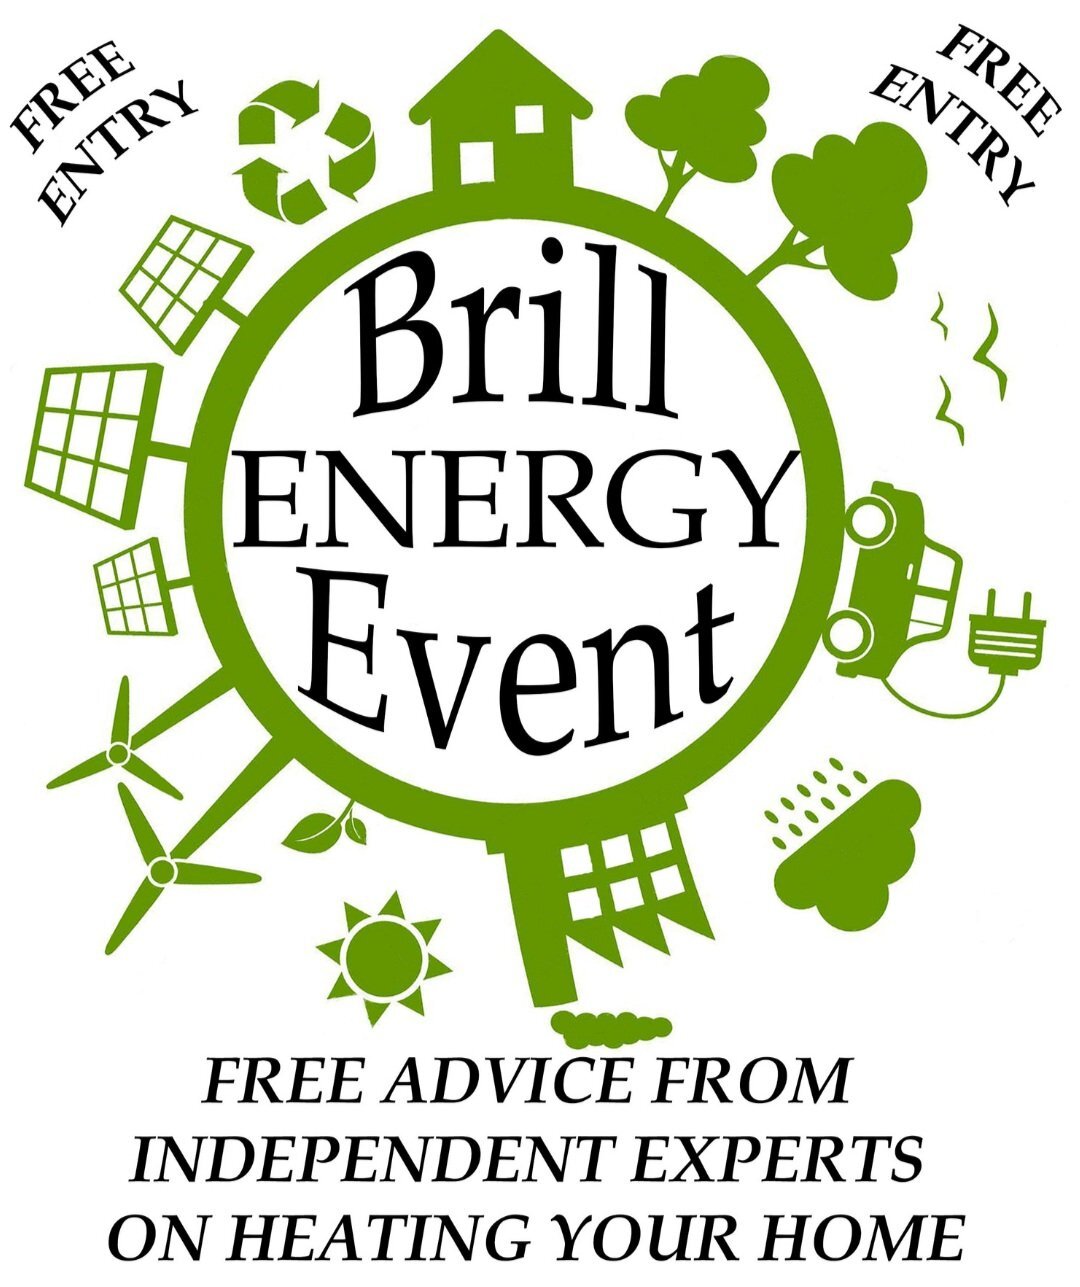 Brill Energy Event : Report and presentations now on the Brill Parish Council &amp; Community website [https://www.brillparishcouncil.co.uk/energy-event]
*
The first speaker starkly summarised the issue: &quot;The climate some of us remember from 40 